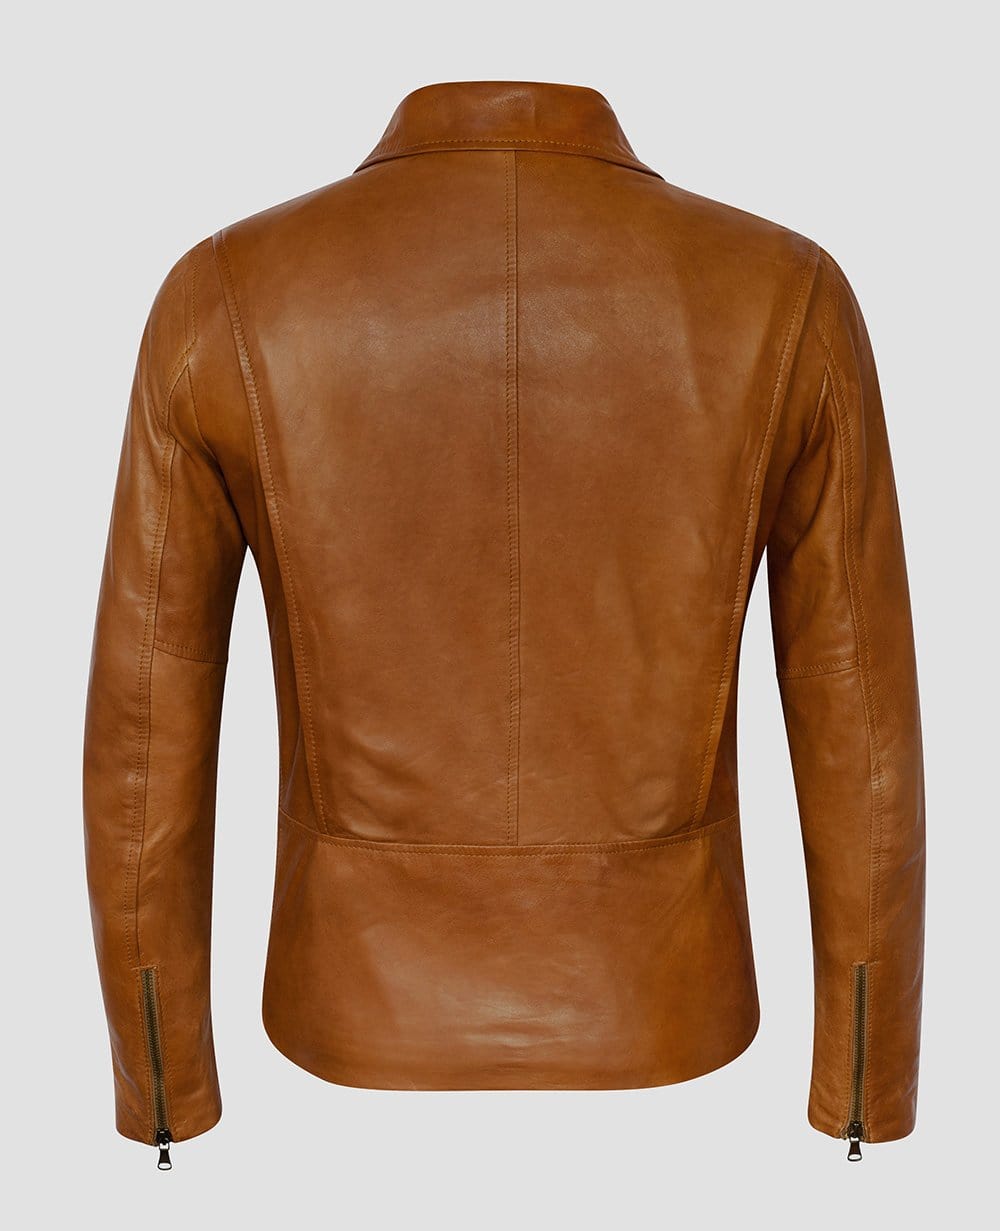 Independence Brothers Review: Custom Leather Jackets for Under $500